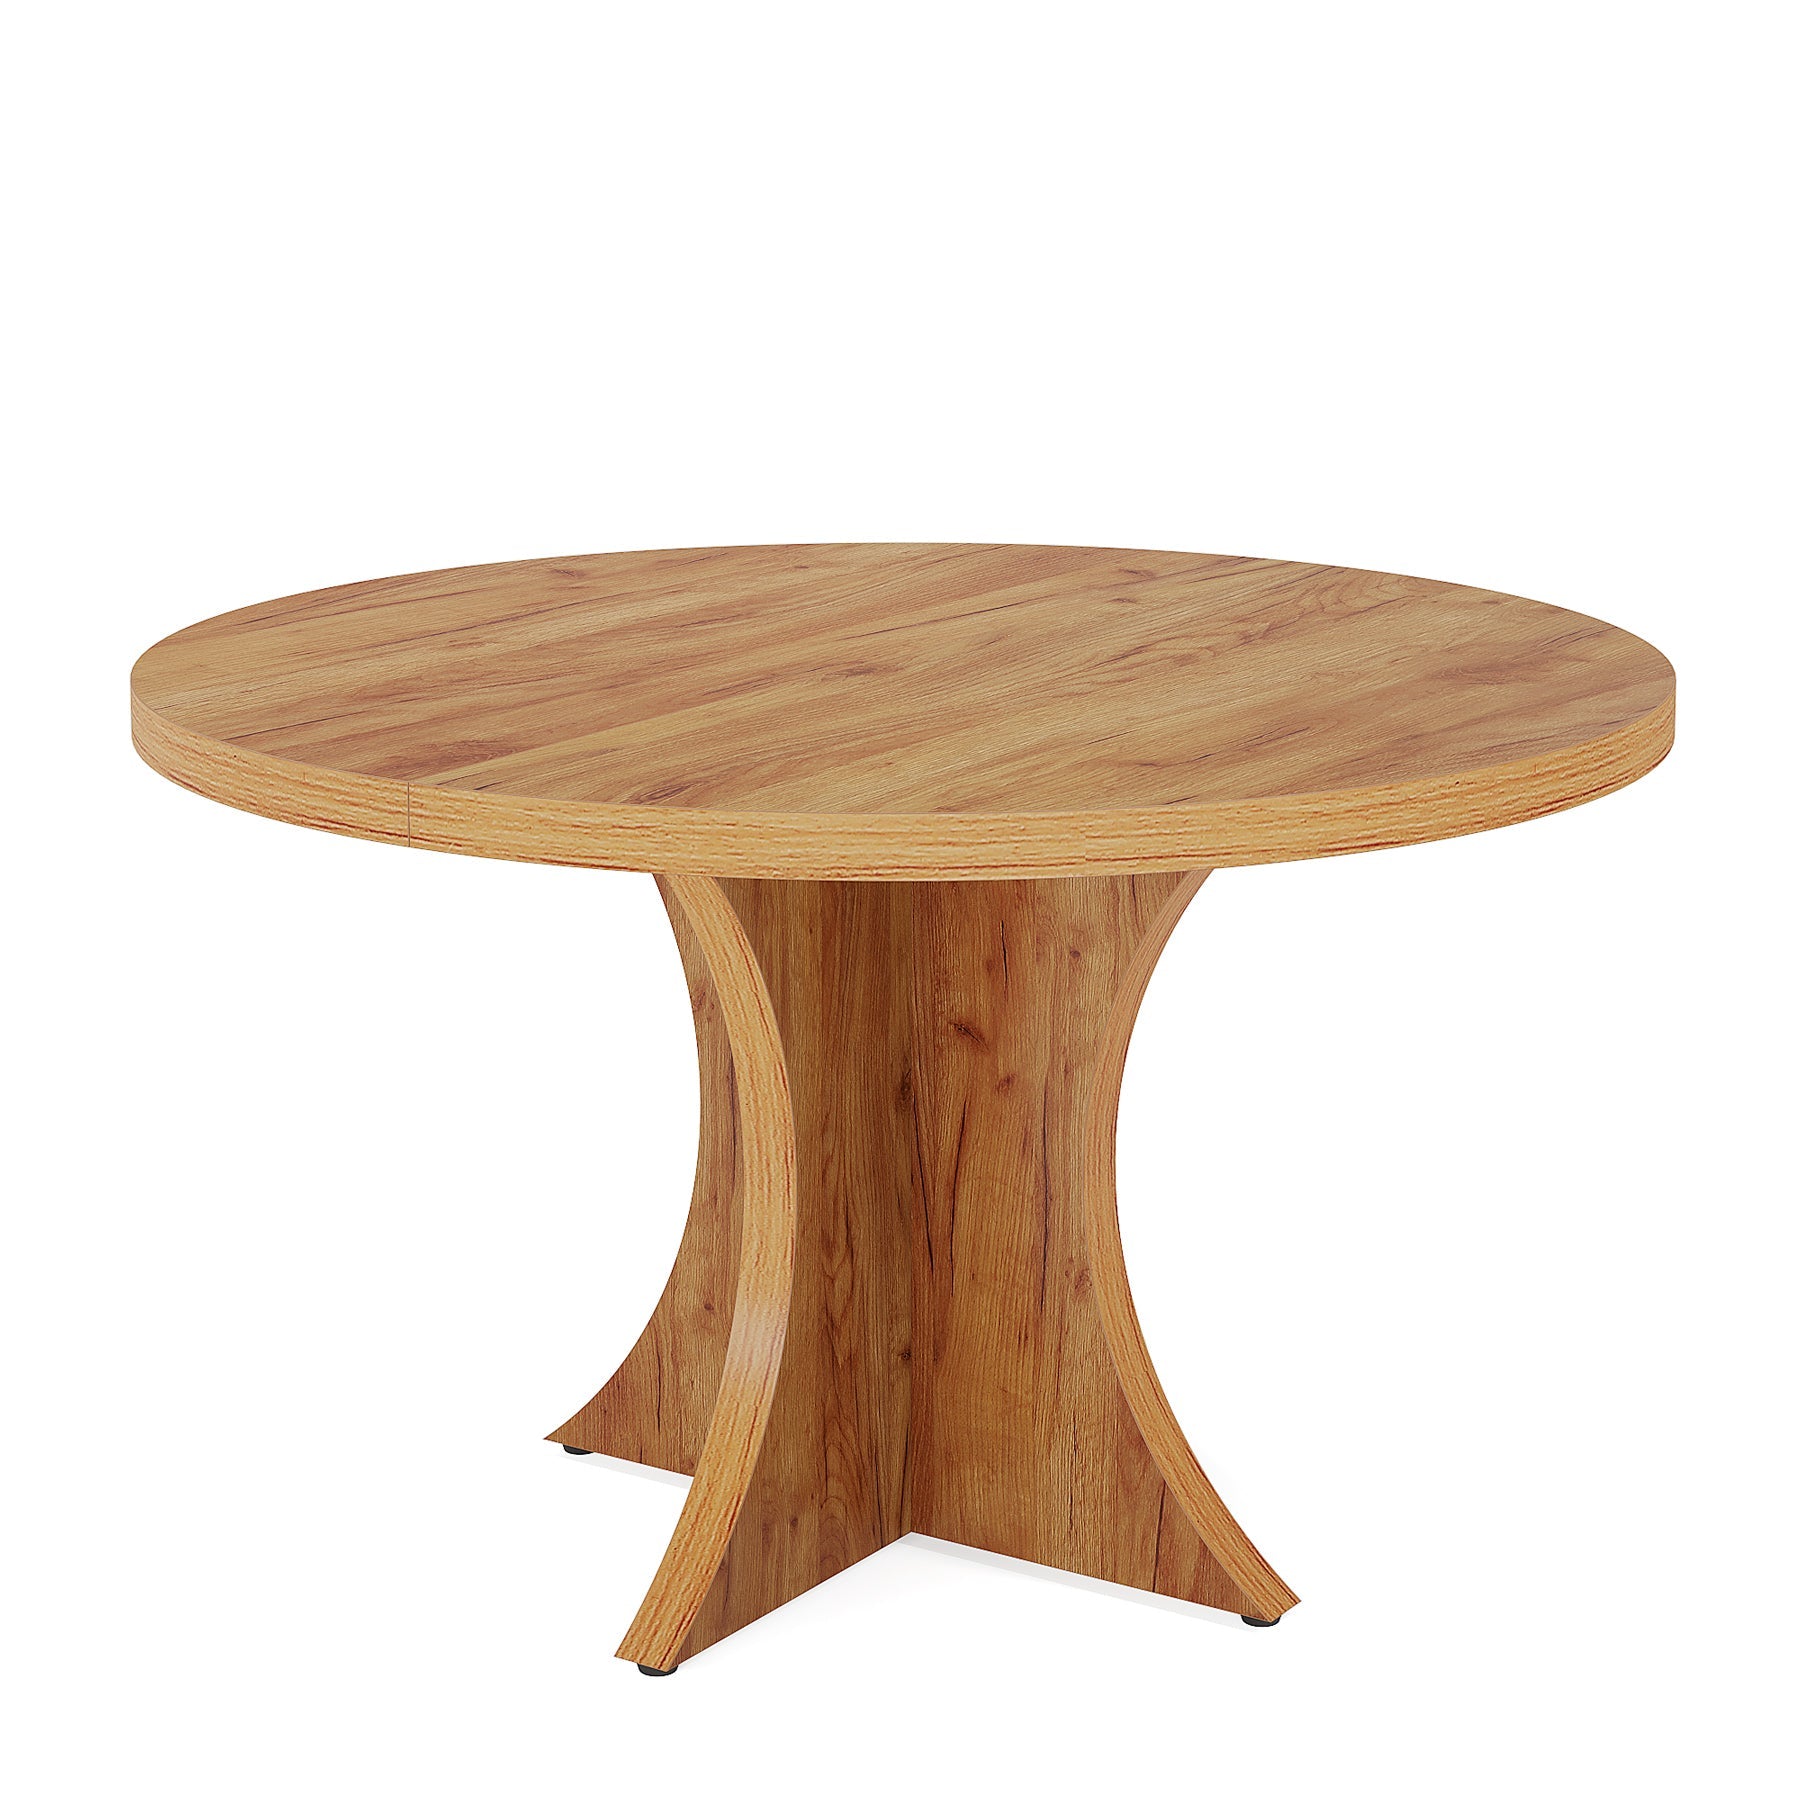 Wood Dining Table, 47.24 Inches Round Kitchen Table for 4-6